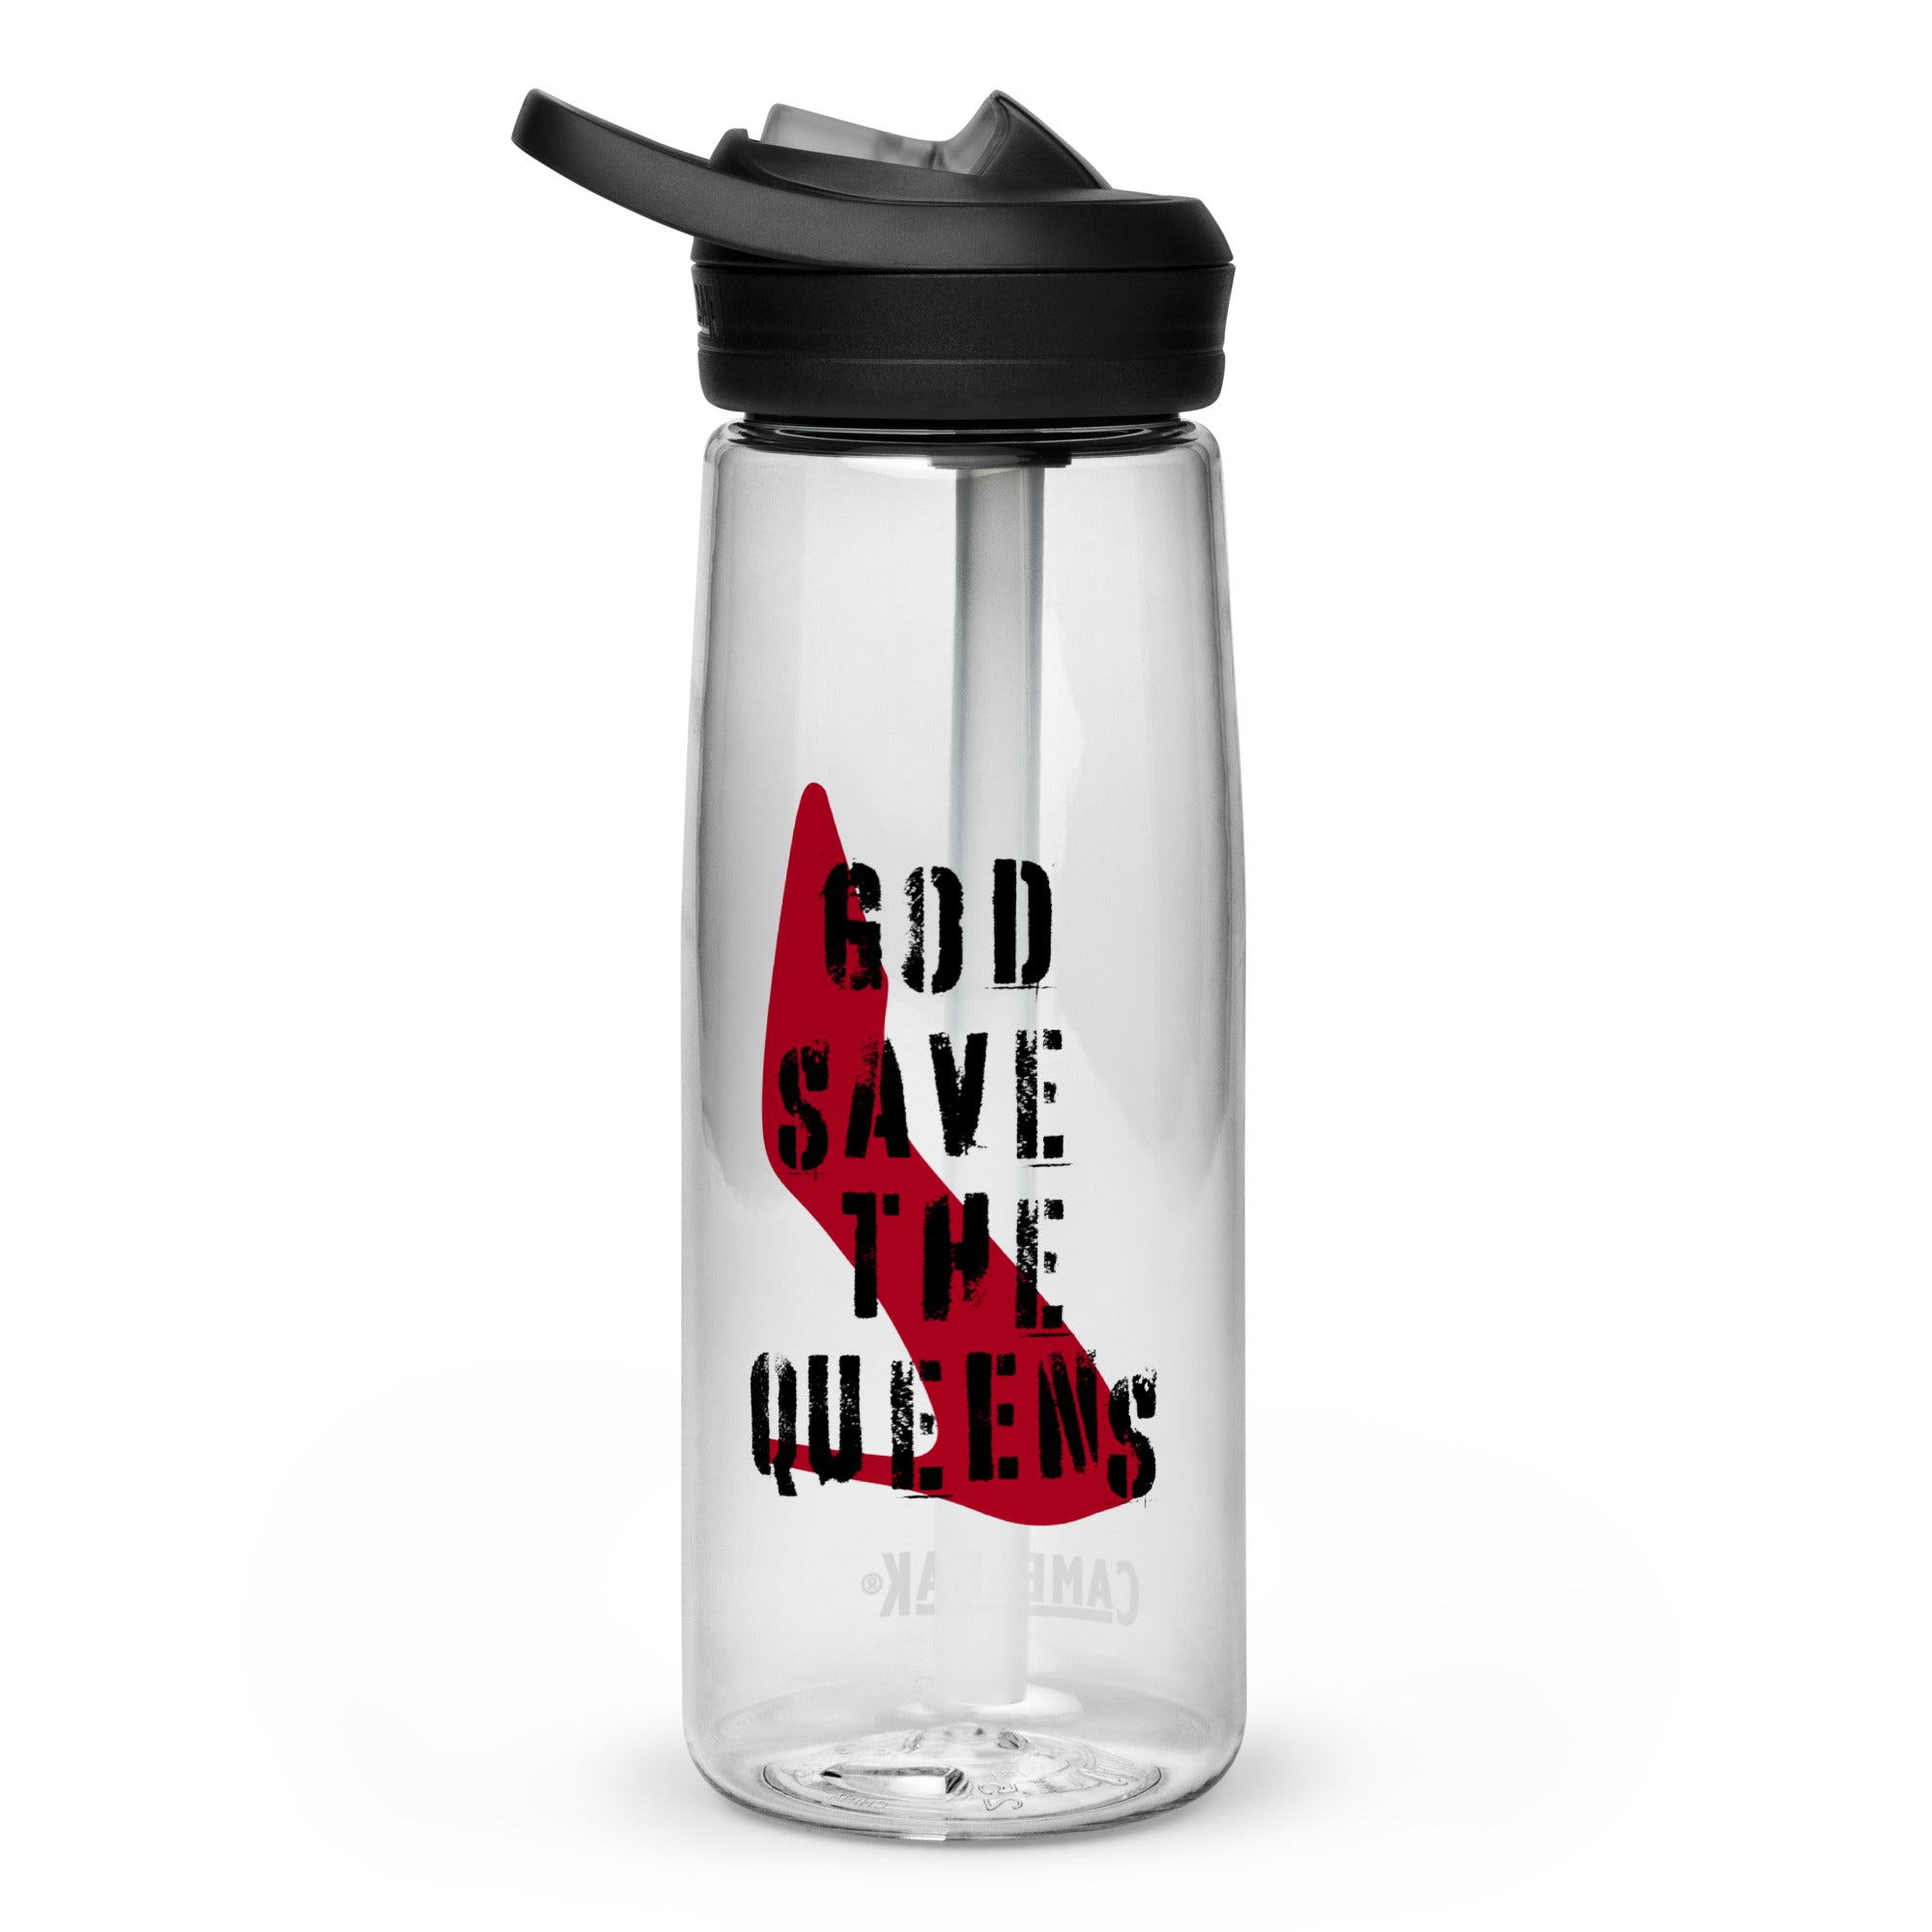 God Save the Queens Royal water bottle